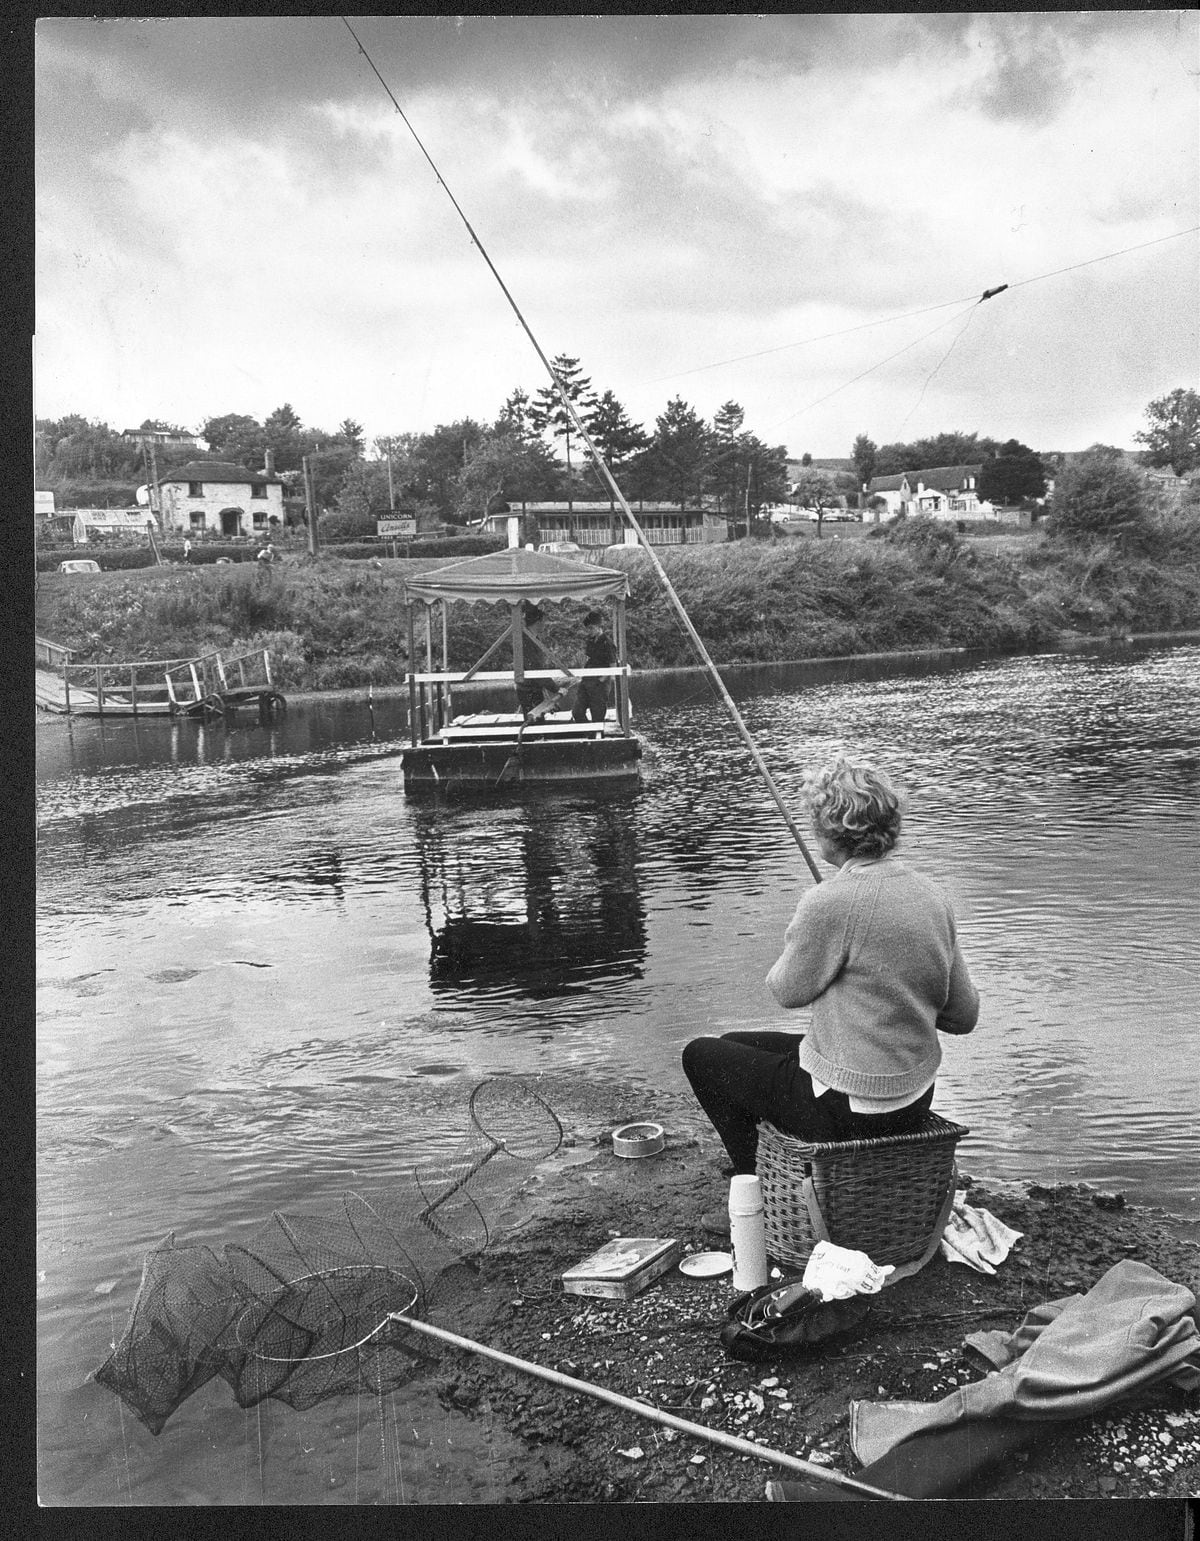 The River Severn, a magnet for anglers from the Black Country – this picture was taken at Hampton Loade in October 1964